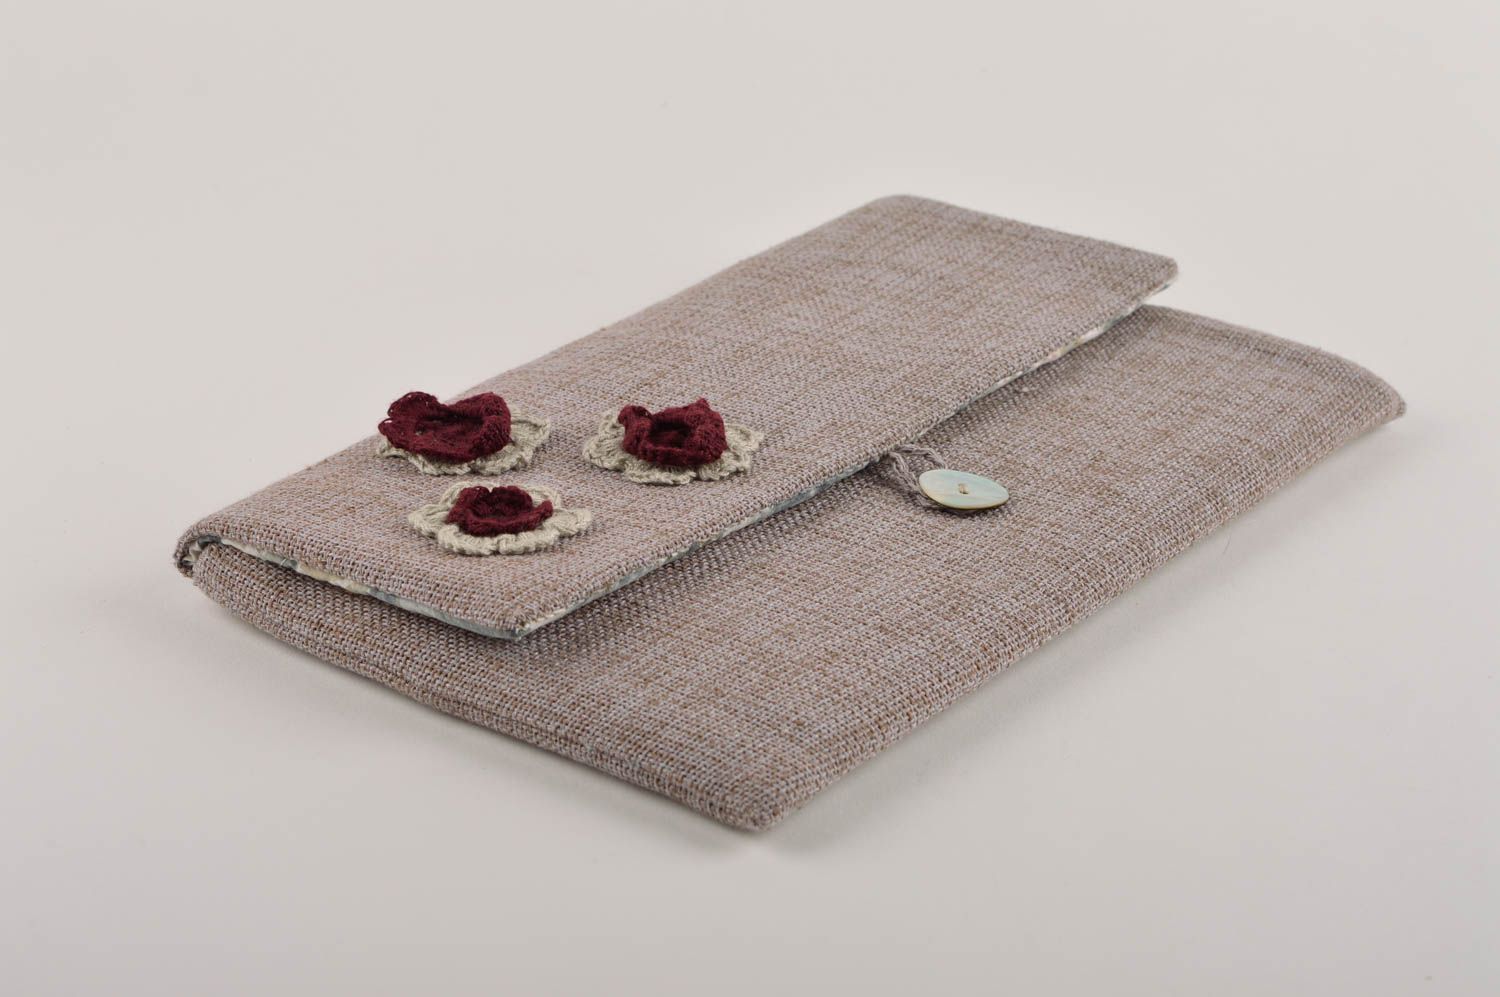 Small handmade beautiful unusual lovely accessories grey designer clutch photo 3